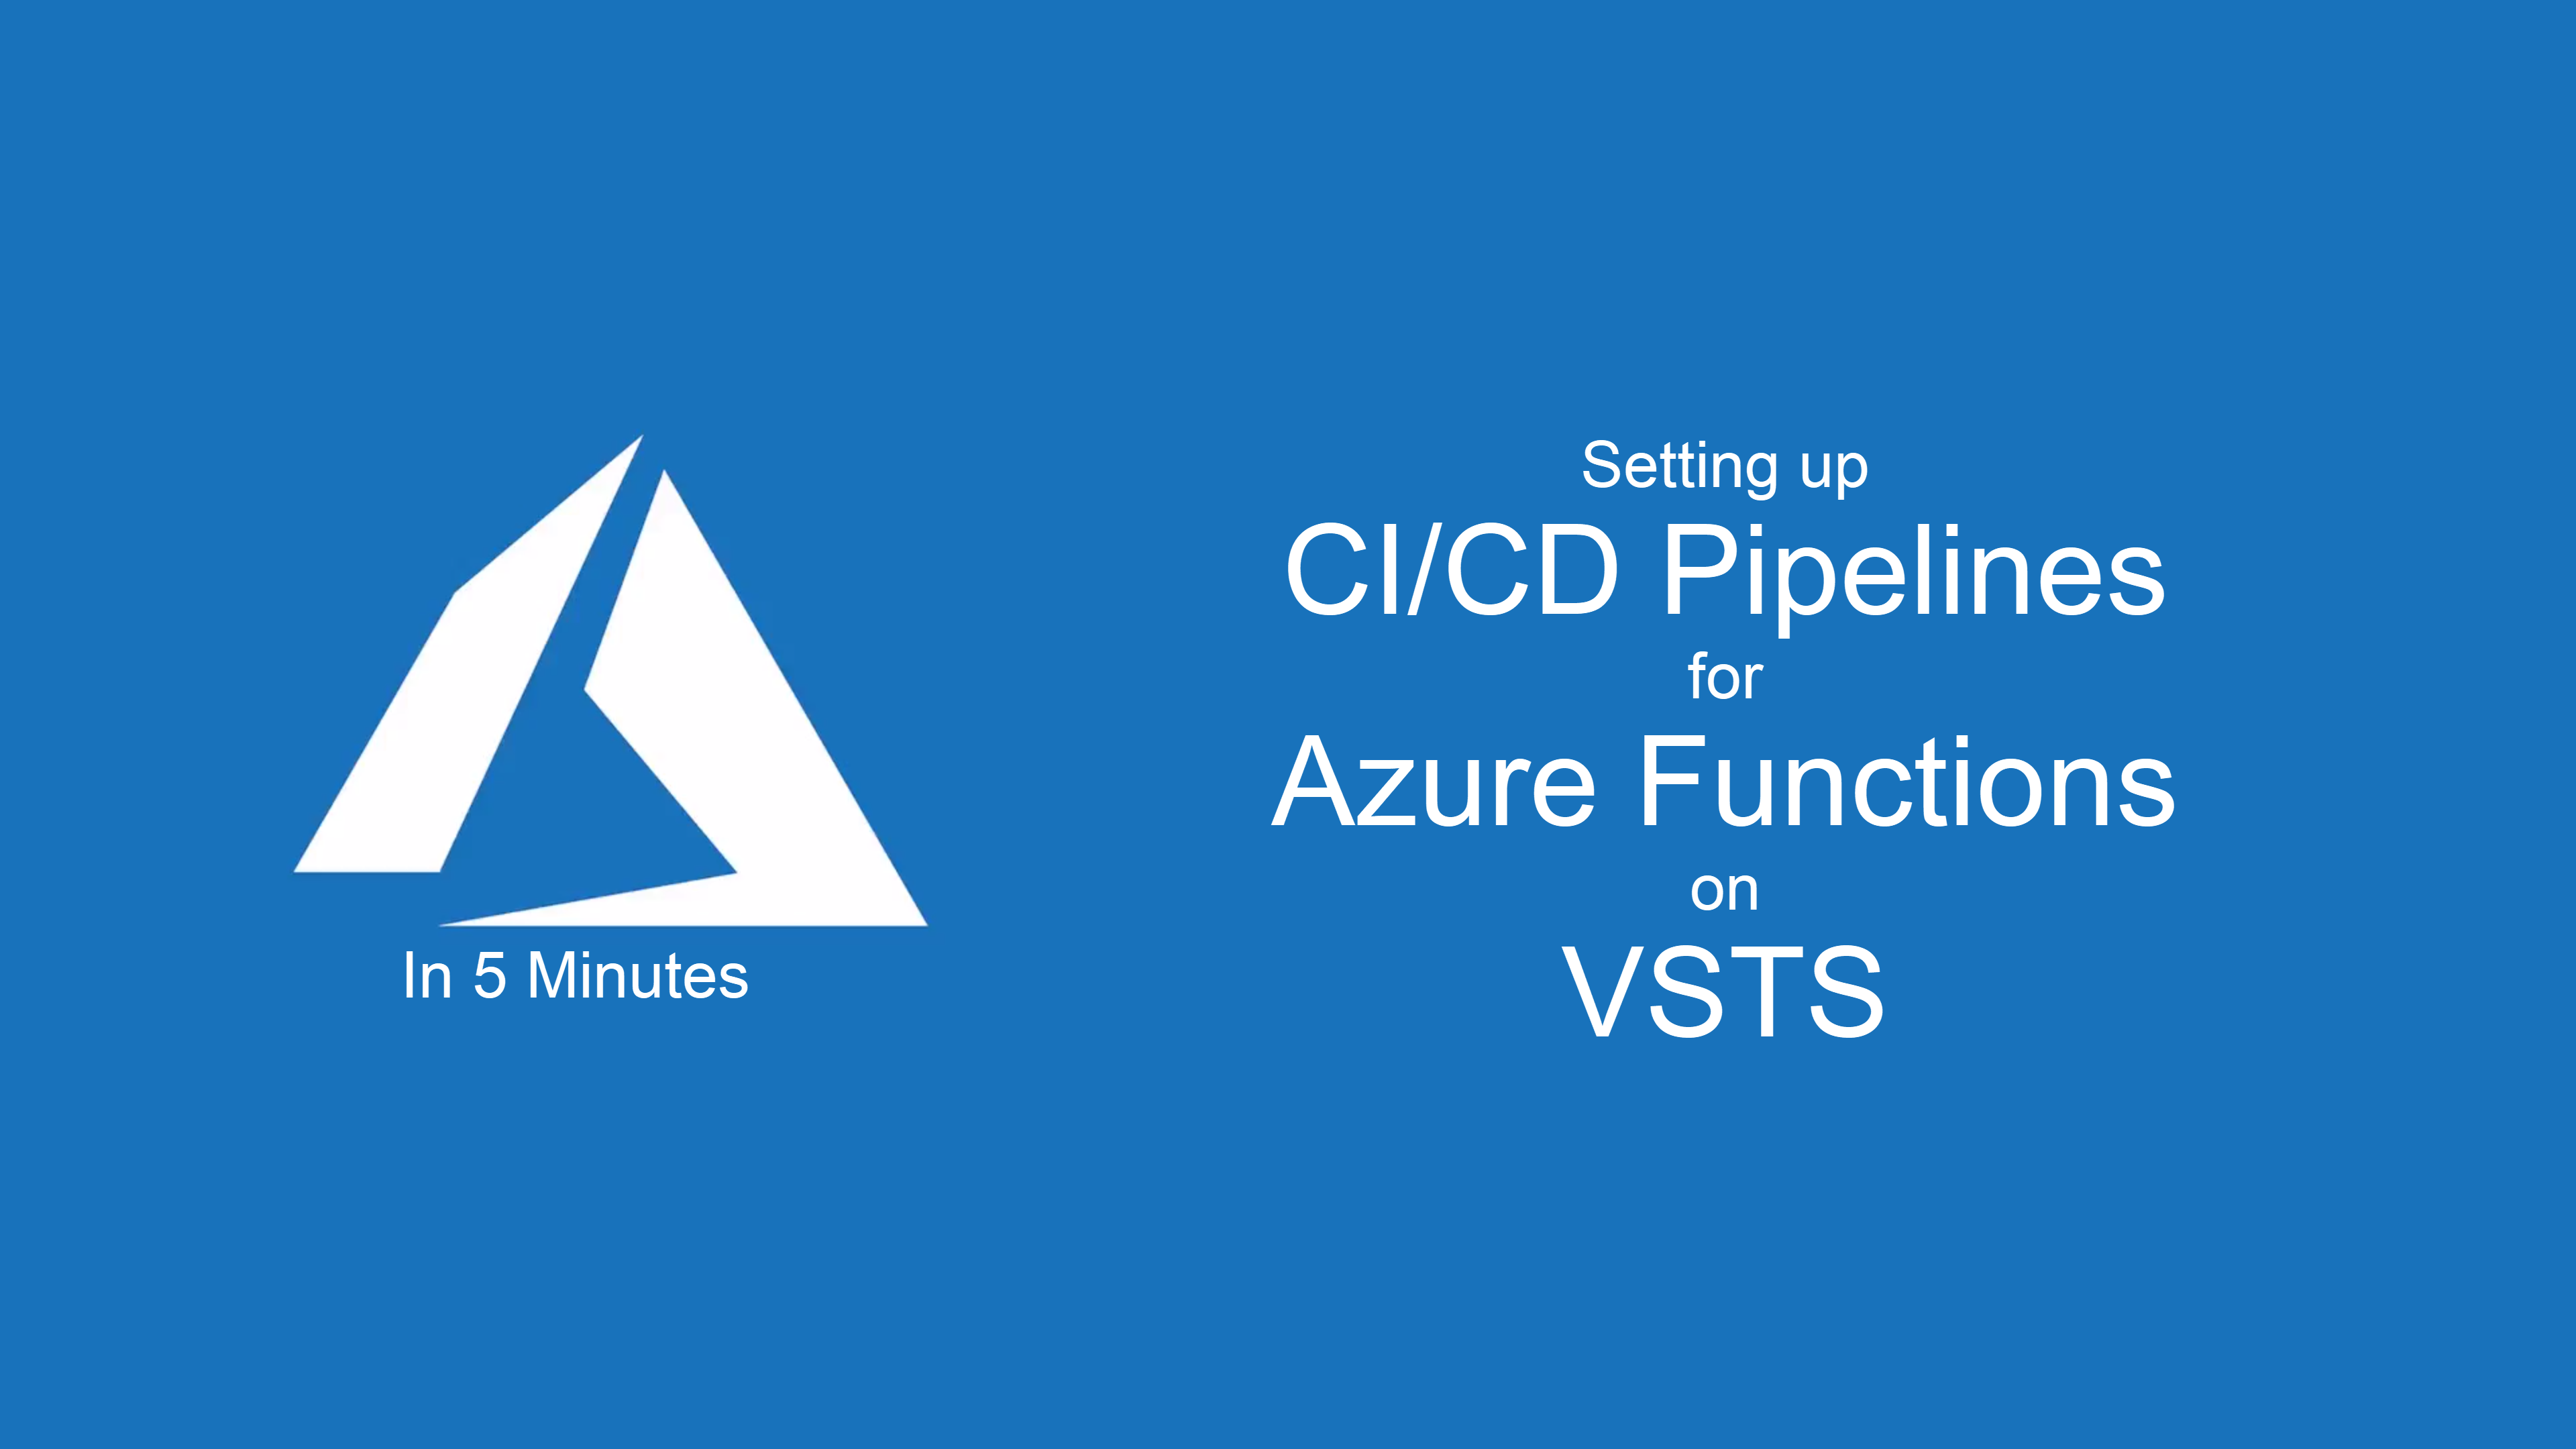 Azure Functions for the Enterprise + Setting up CI/CD Pipelines